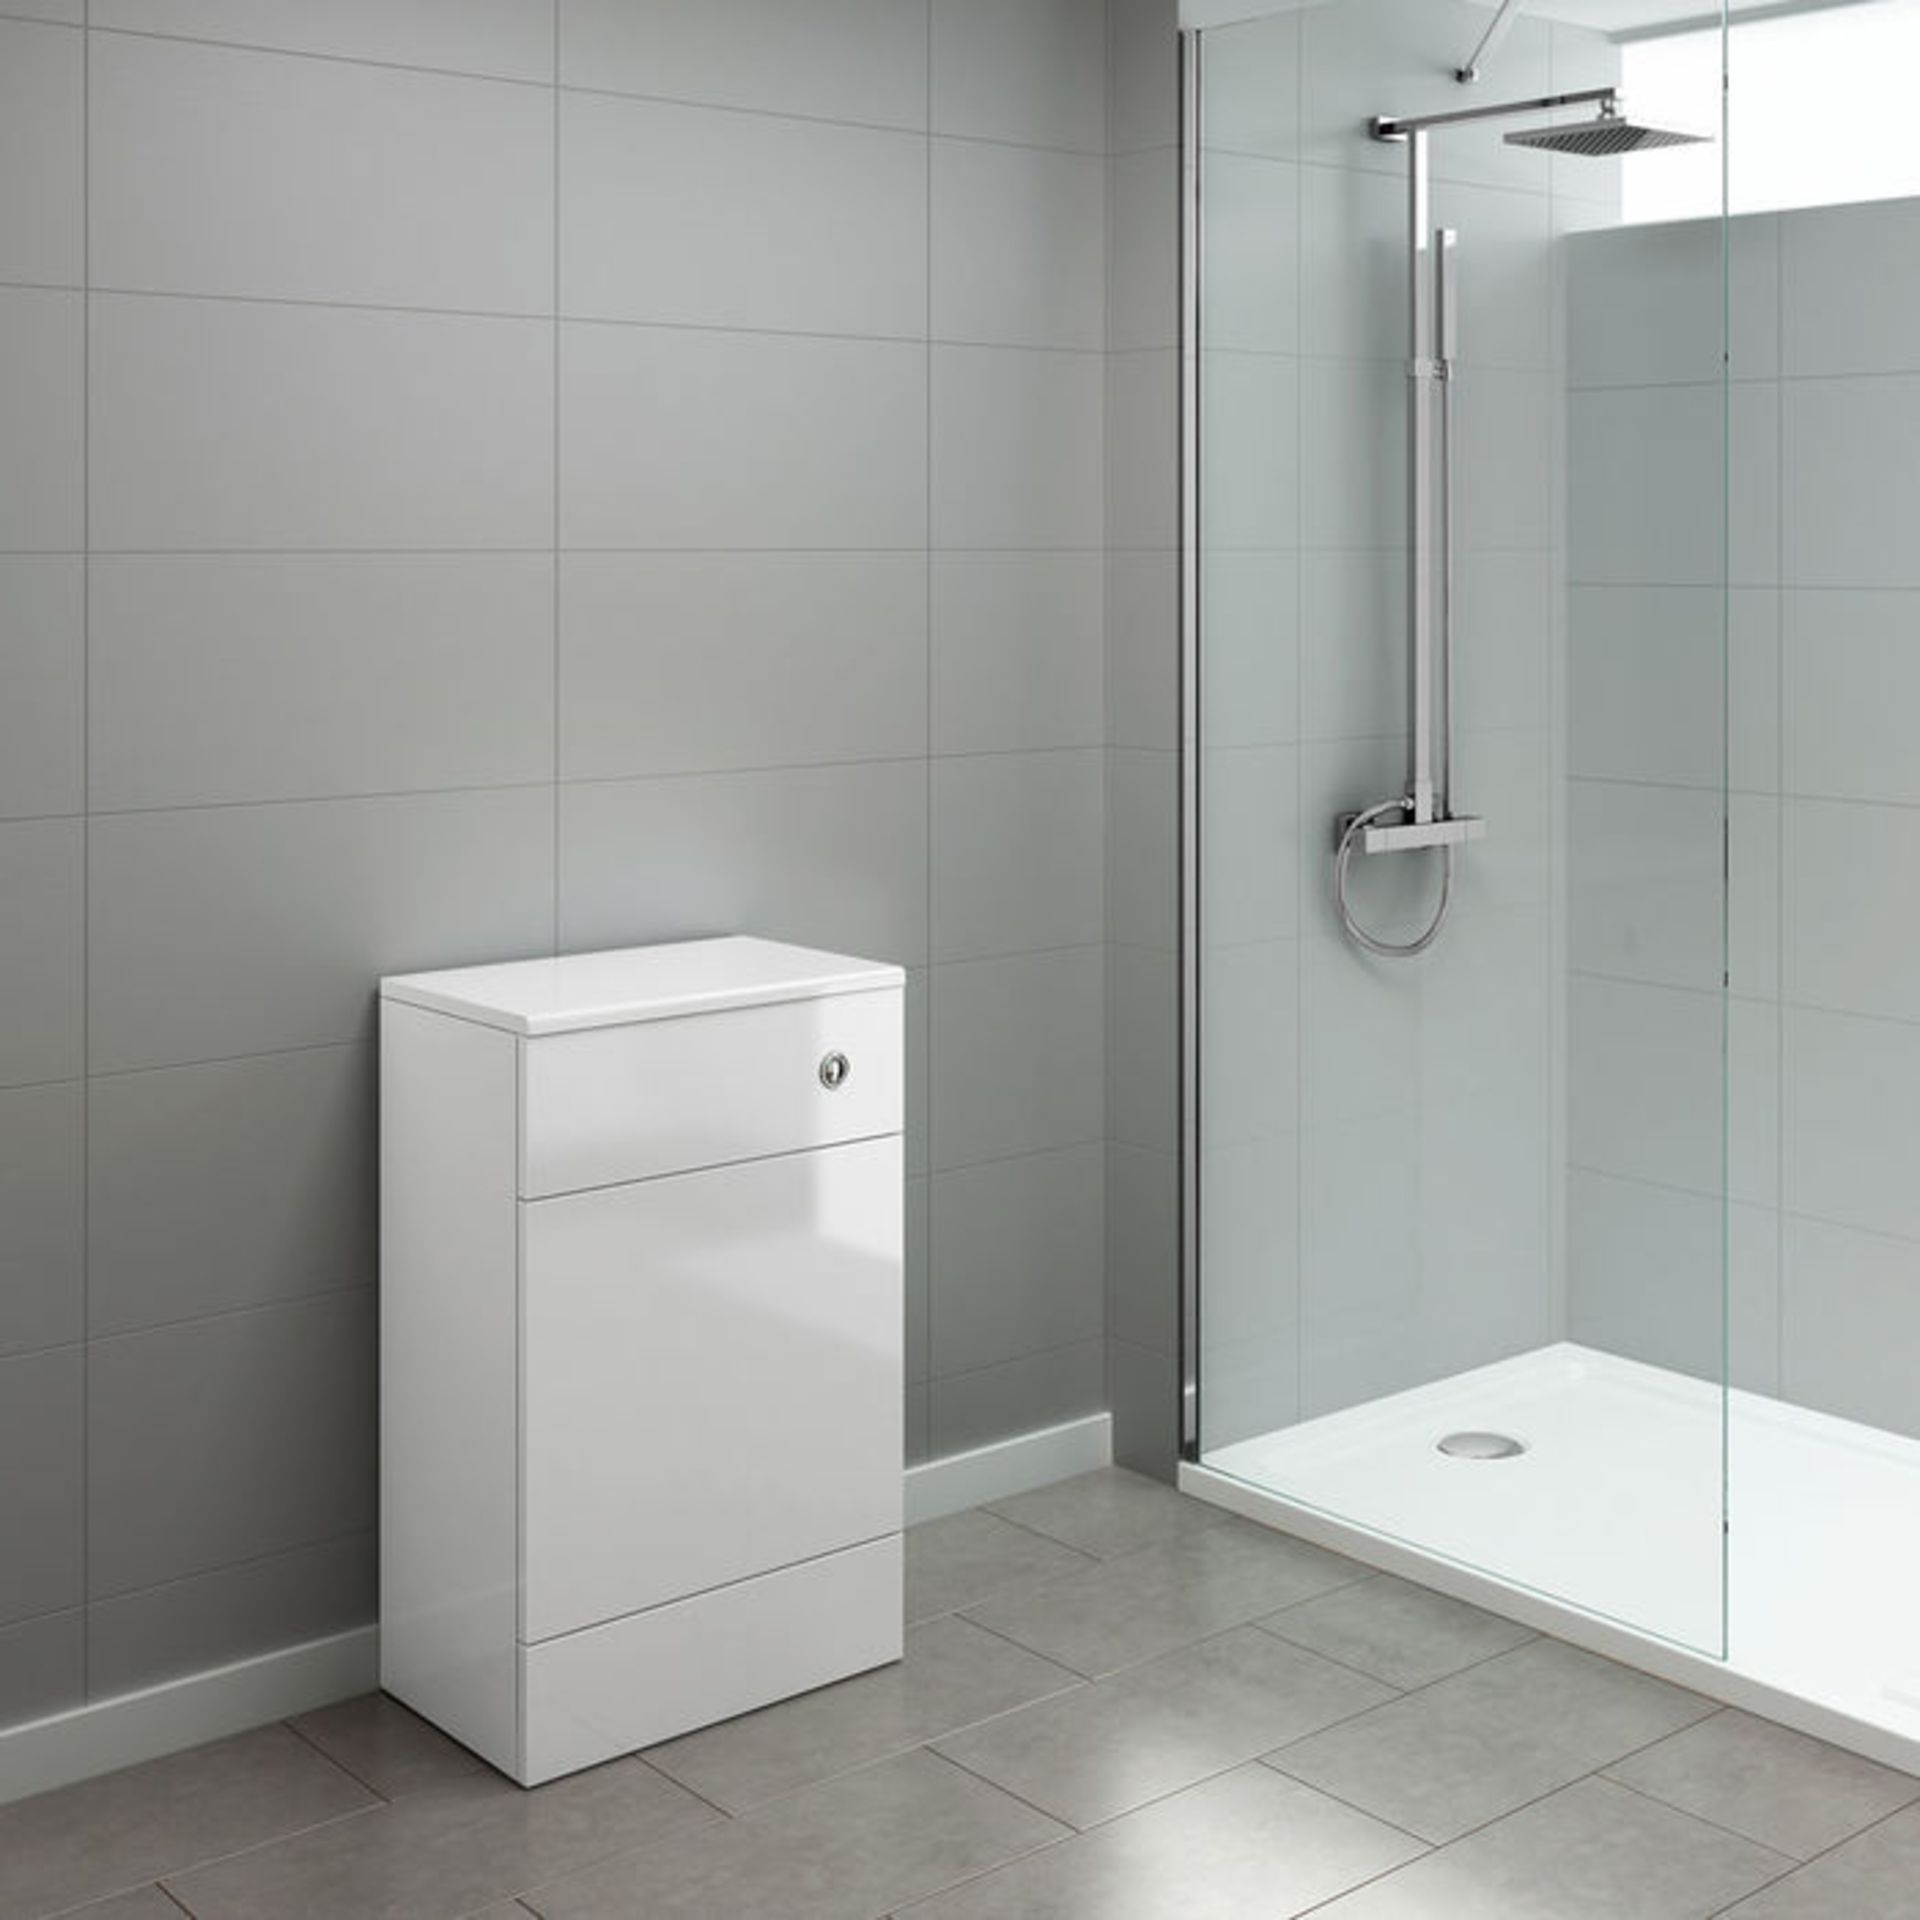 (SP53) 500mm Harper Gloss White Back To Wall Toilet Unit. RRP £119.99. Our discreet unit cleverly - Image 2 of 4